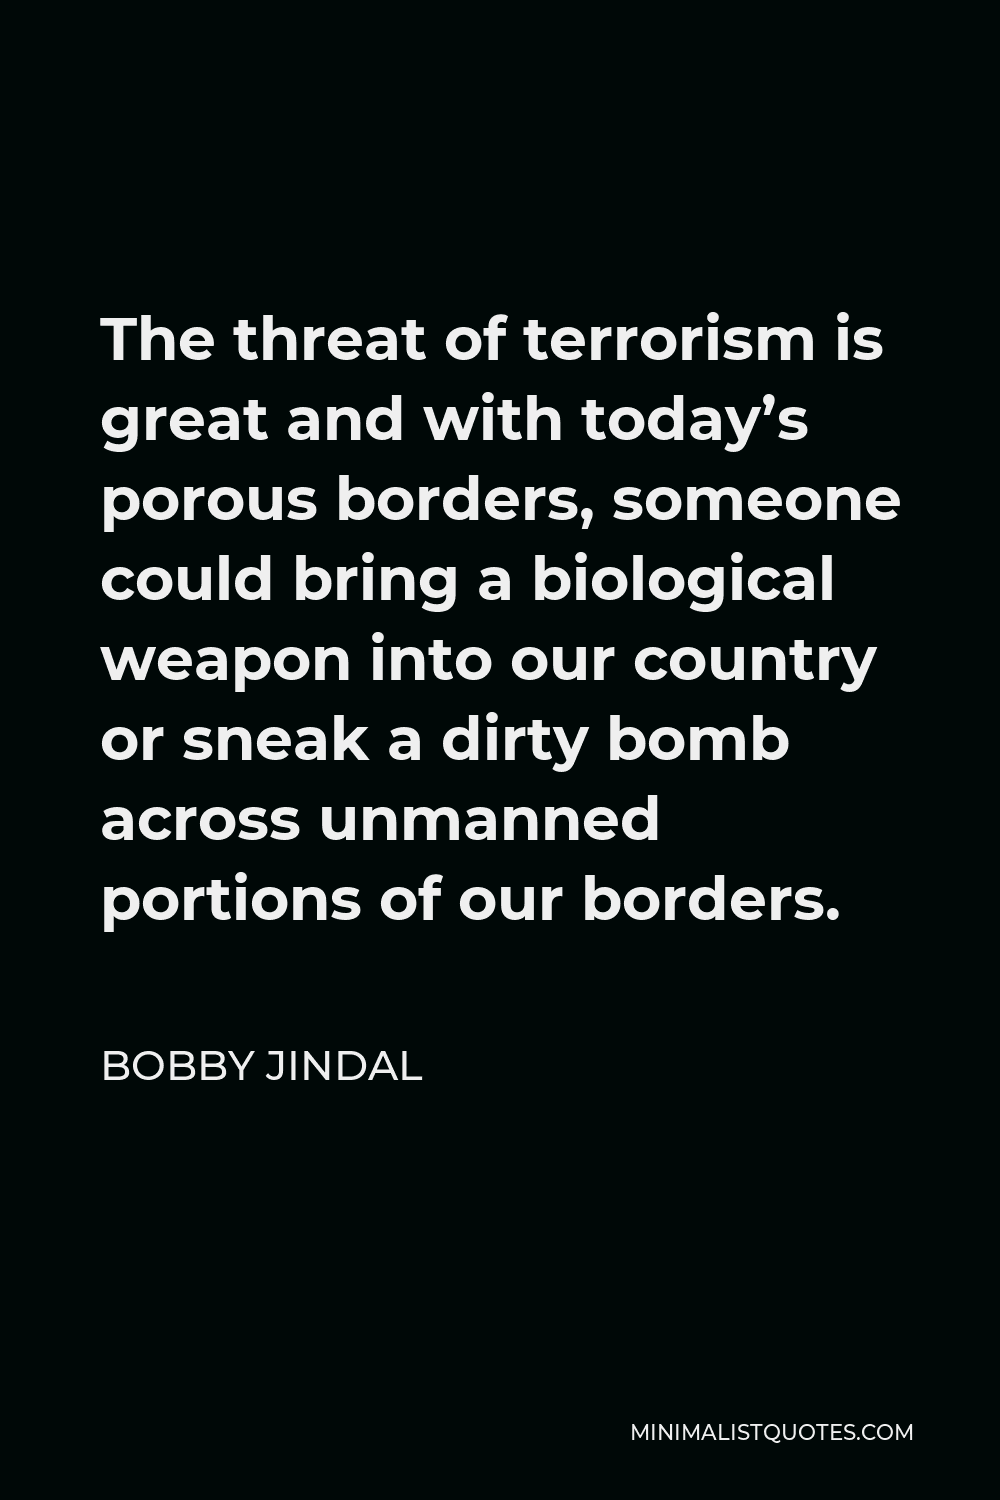 Bobby Jindal Quote - The threat of terrorism is great and with today’s porous borders, someone could bring a biological weapon into our country or sneak a dirty bomb across unmanned portions of our borders.